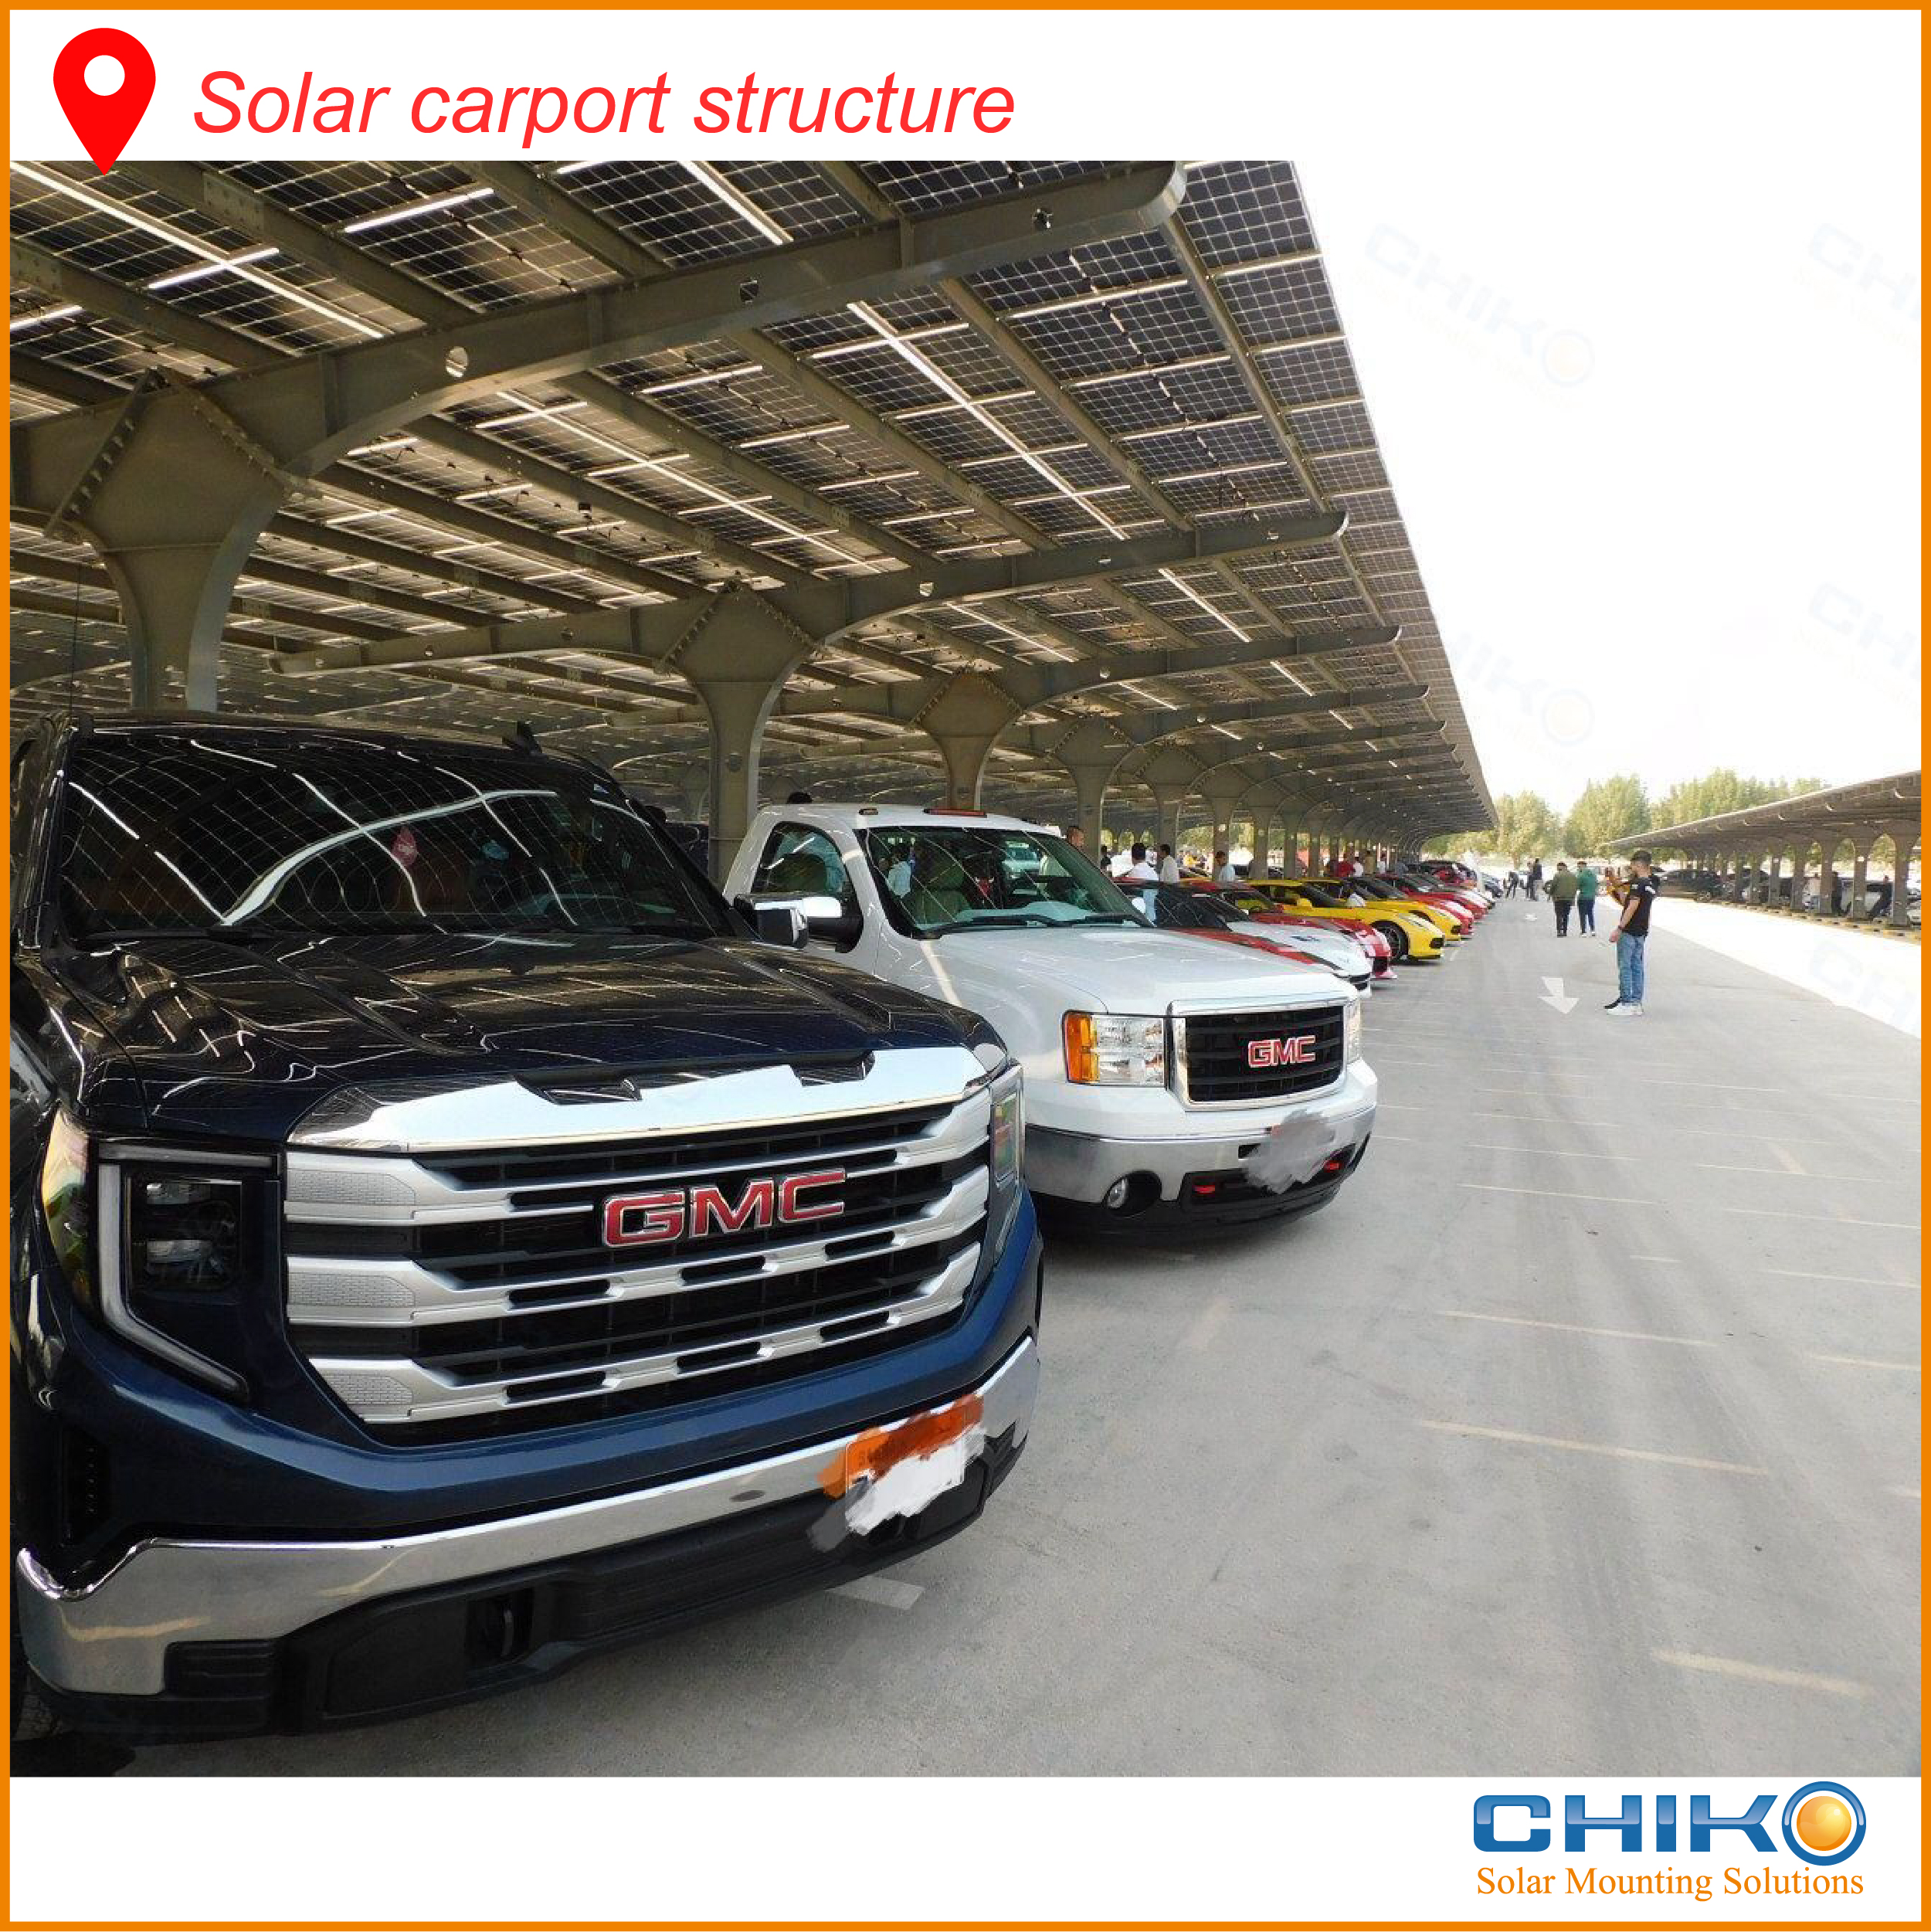 The 4MW solar carport of Bahrain Circuit was successfully completed